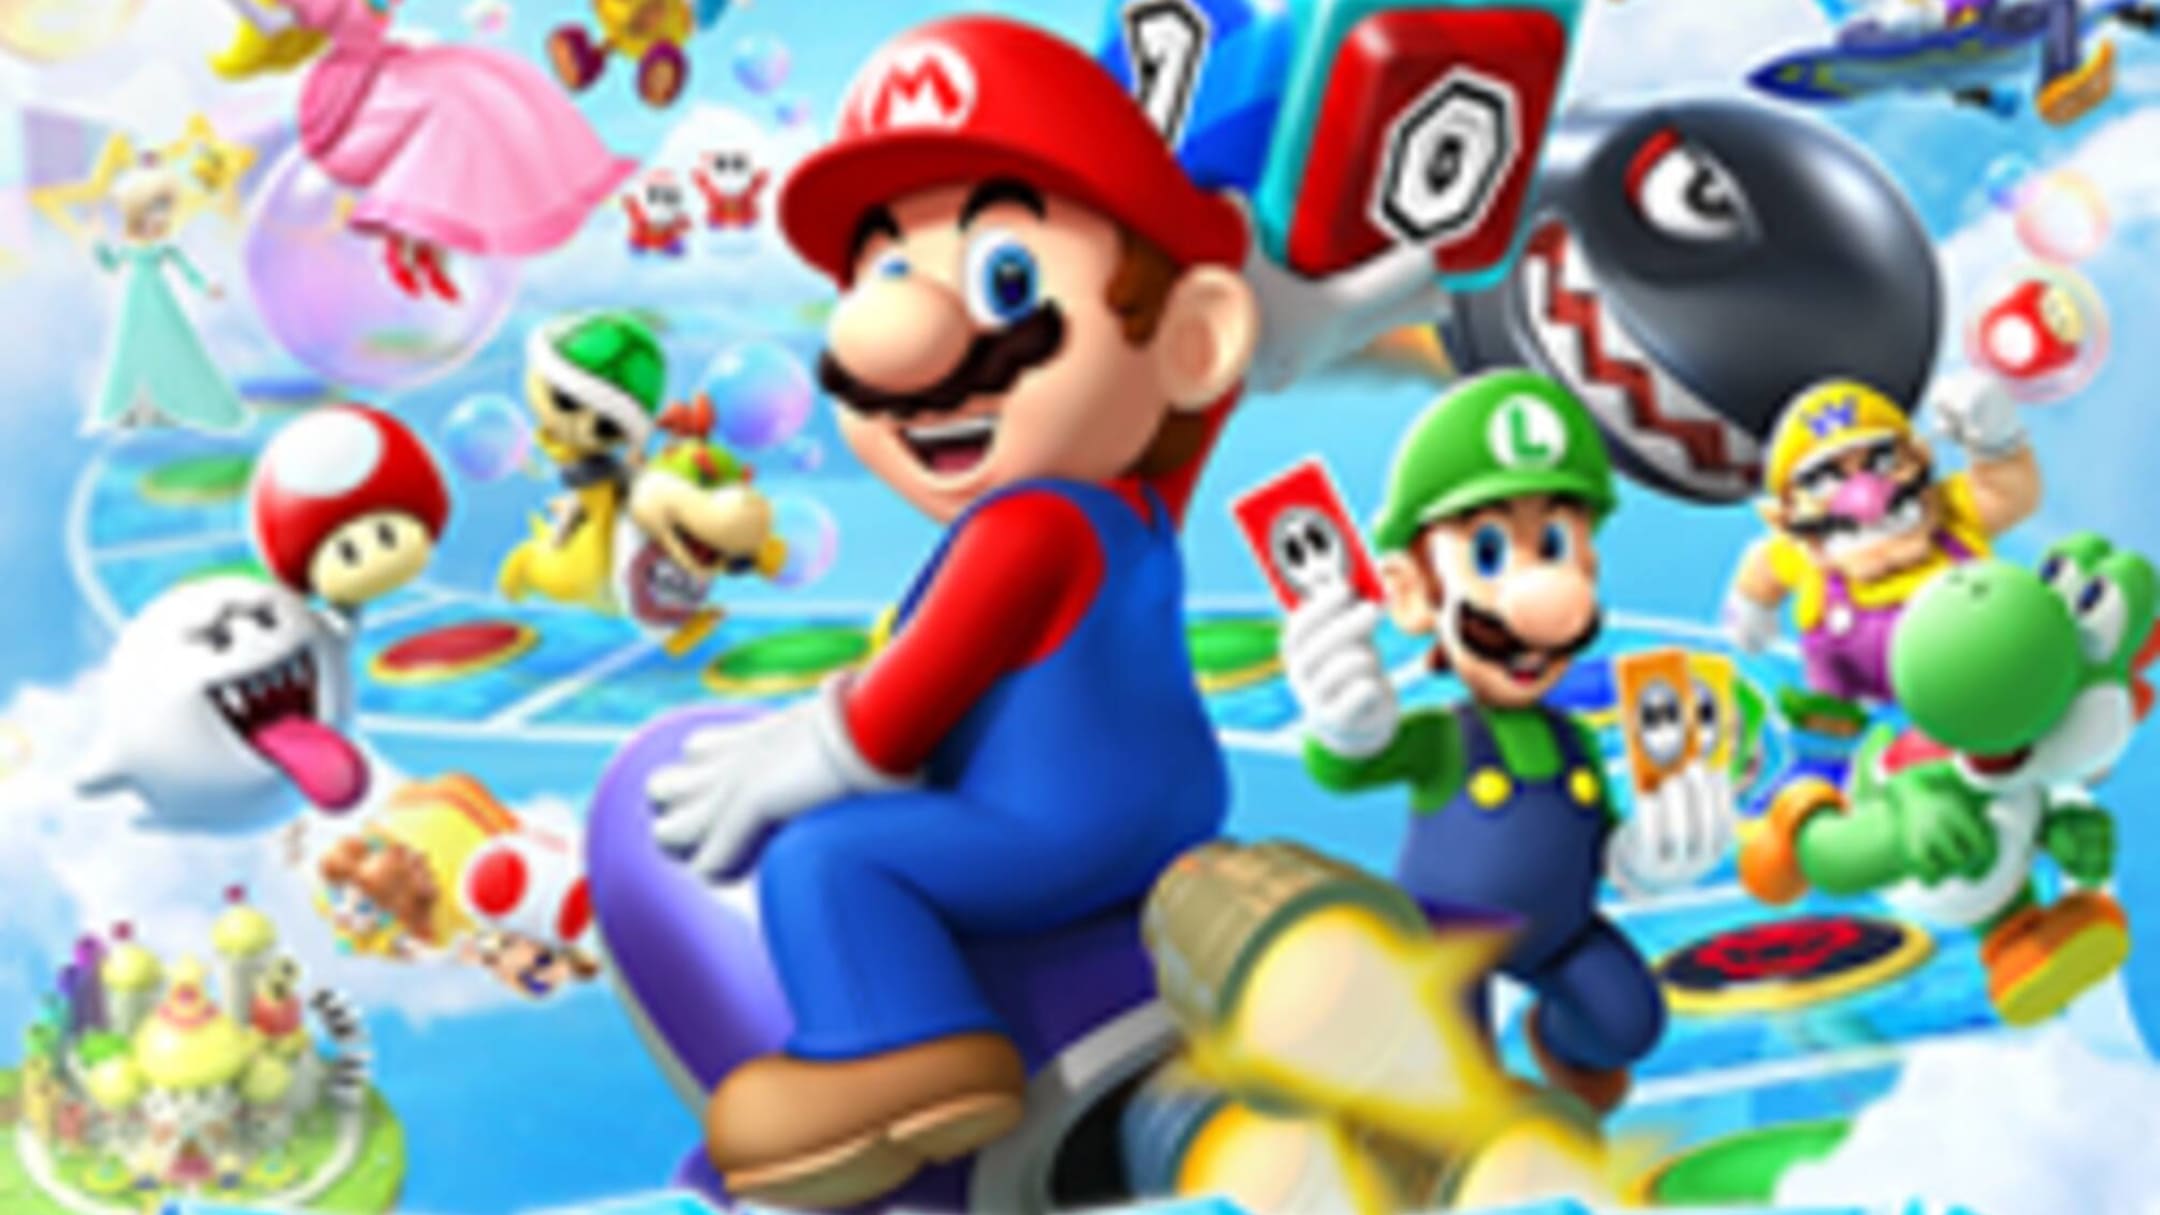 Wii U game lineup punctuated by New Super Mario Bros. U - CNET